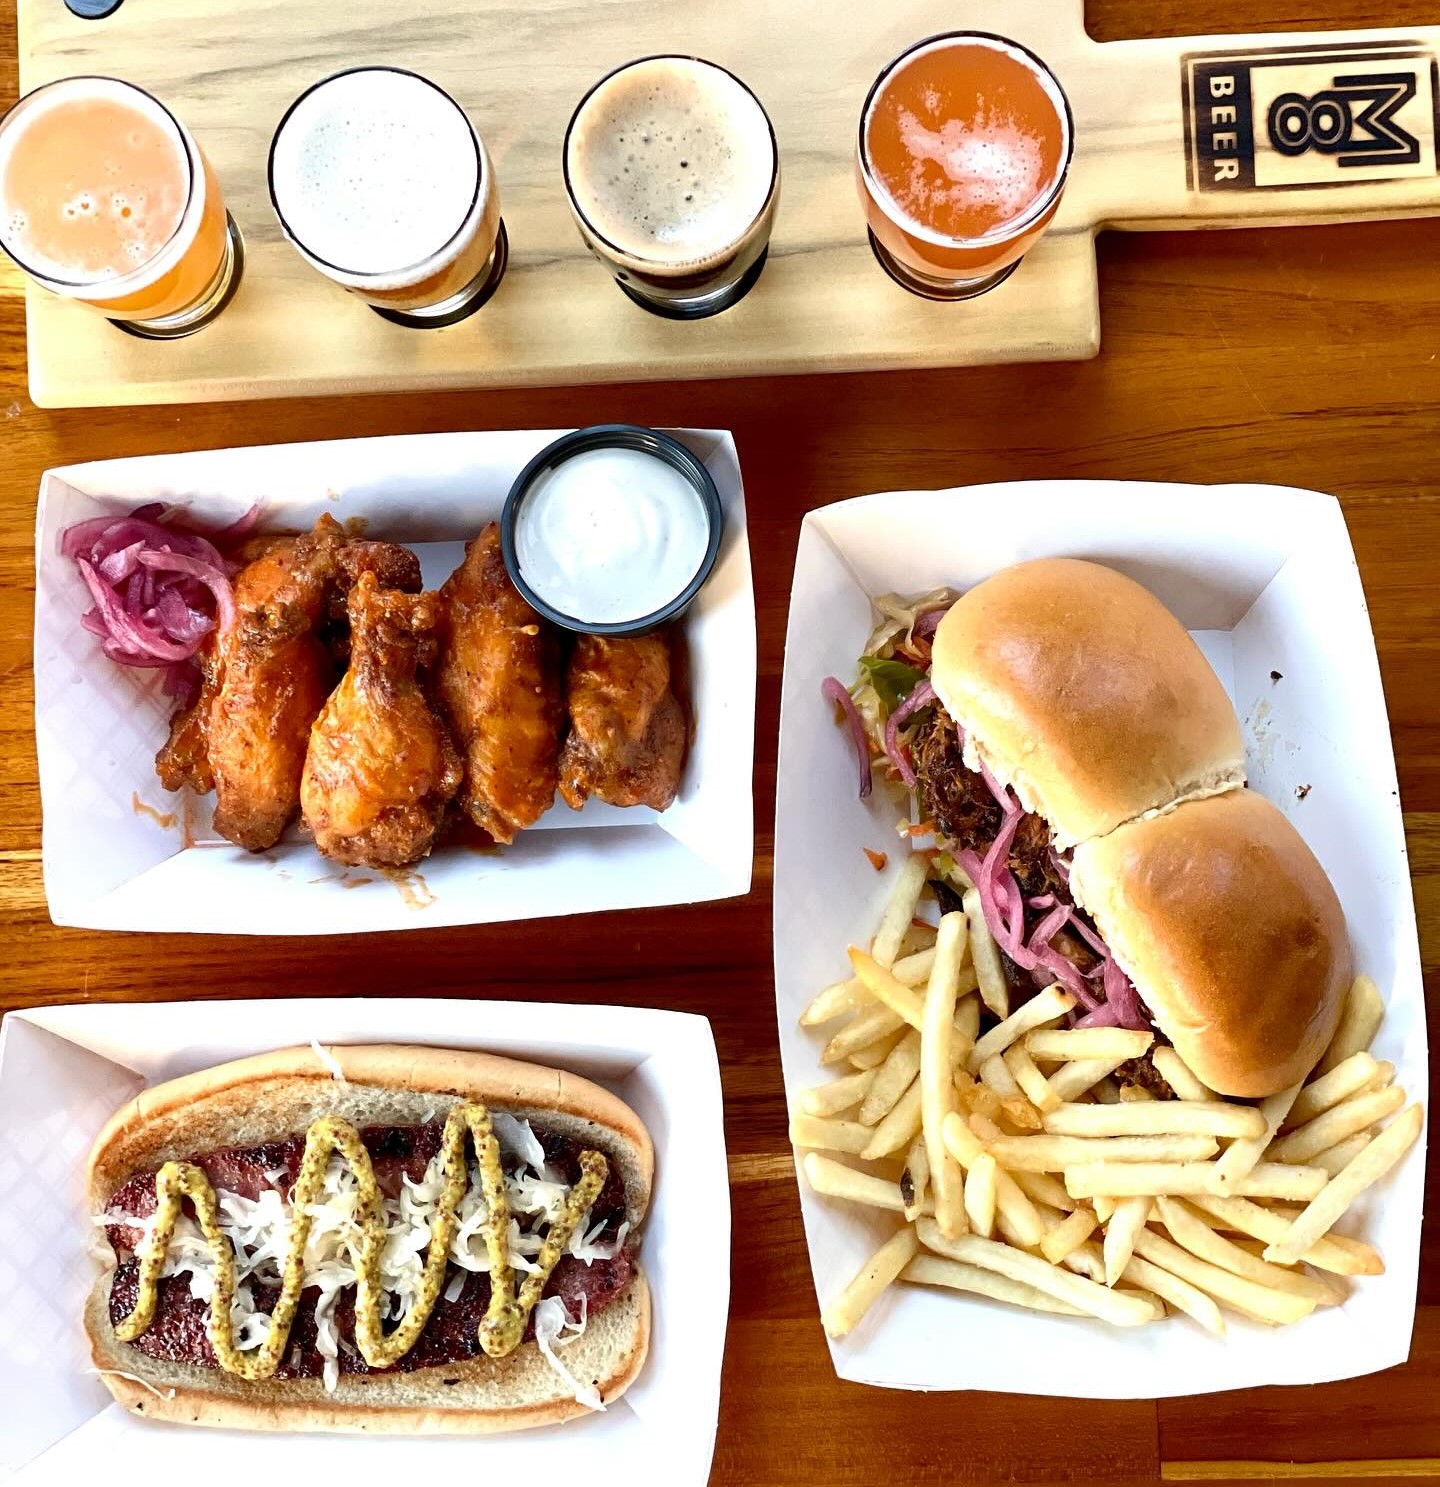 a flight of beer, a plate of wings with red onions and dip, a hot dog, and a sandwich with fries